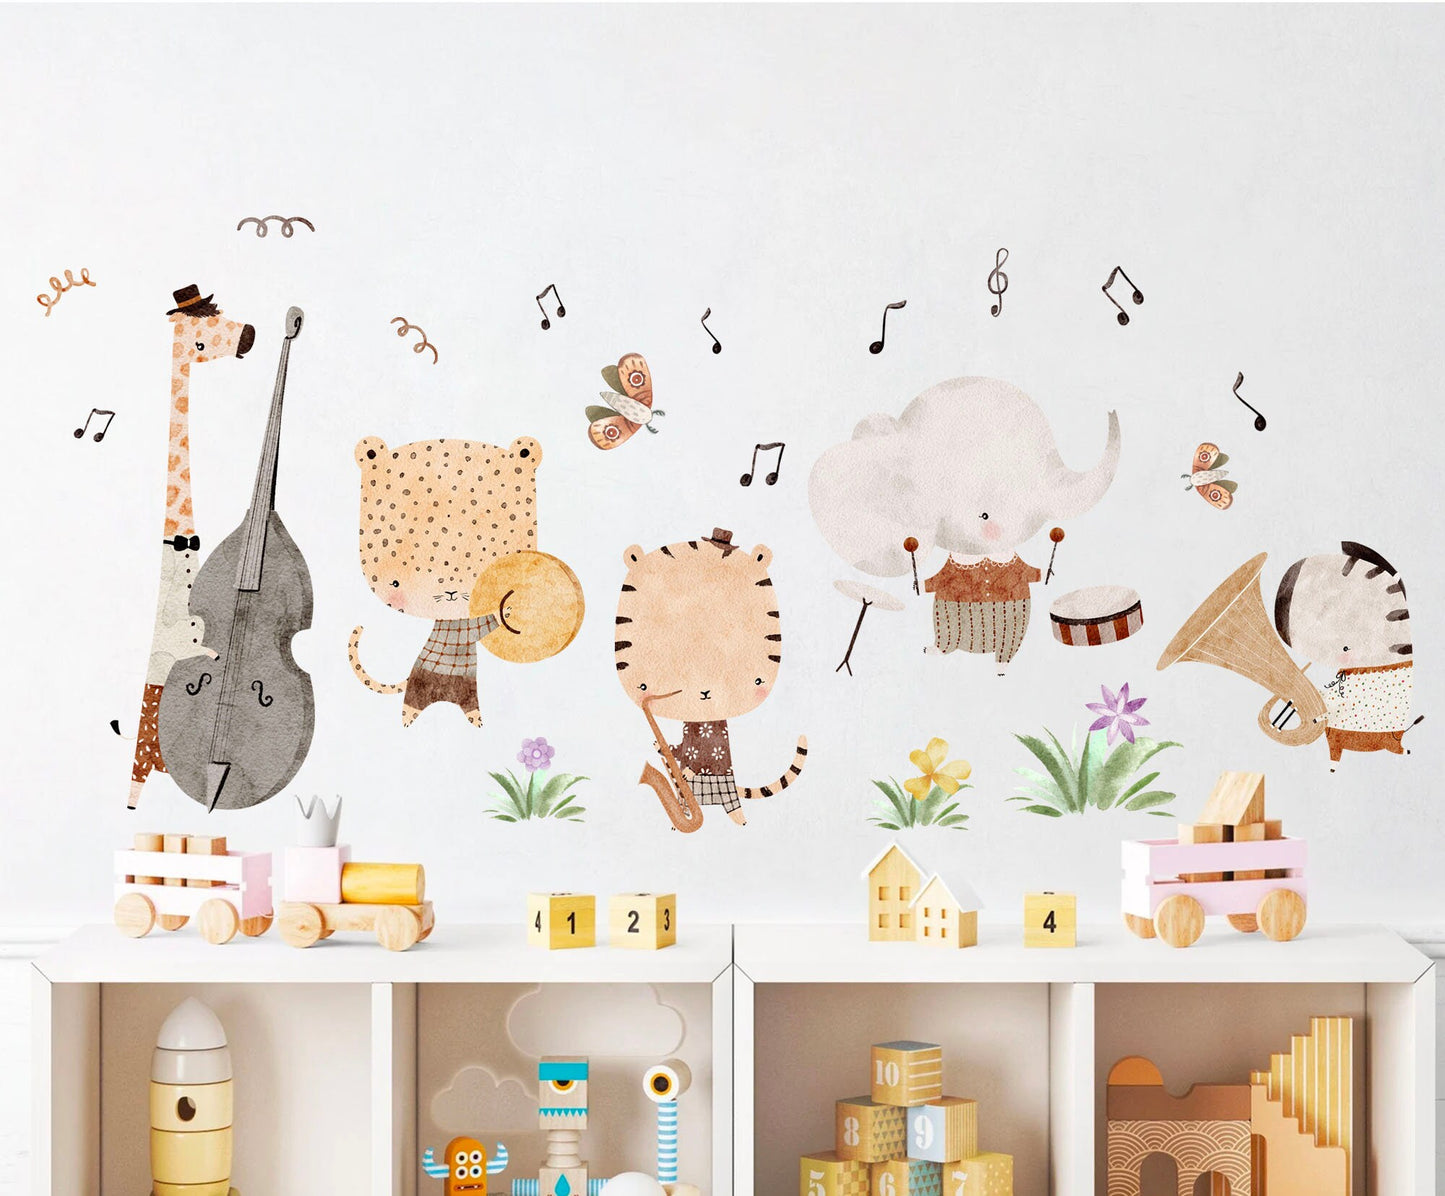 Animal Orchestra Grassland Wall Decal - Giraffe Playing Cello, Elephant Drummer and more - BR376